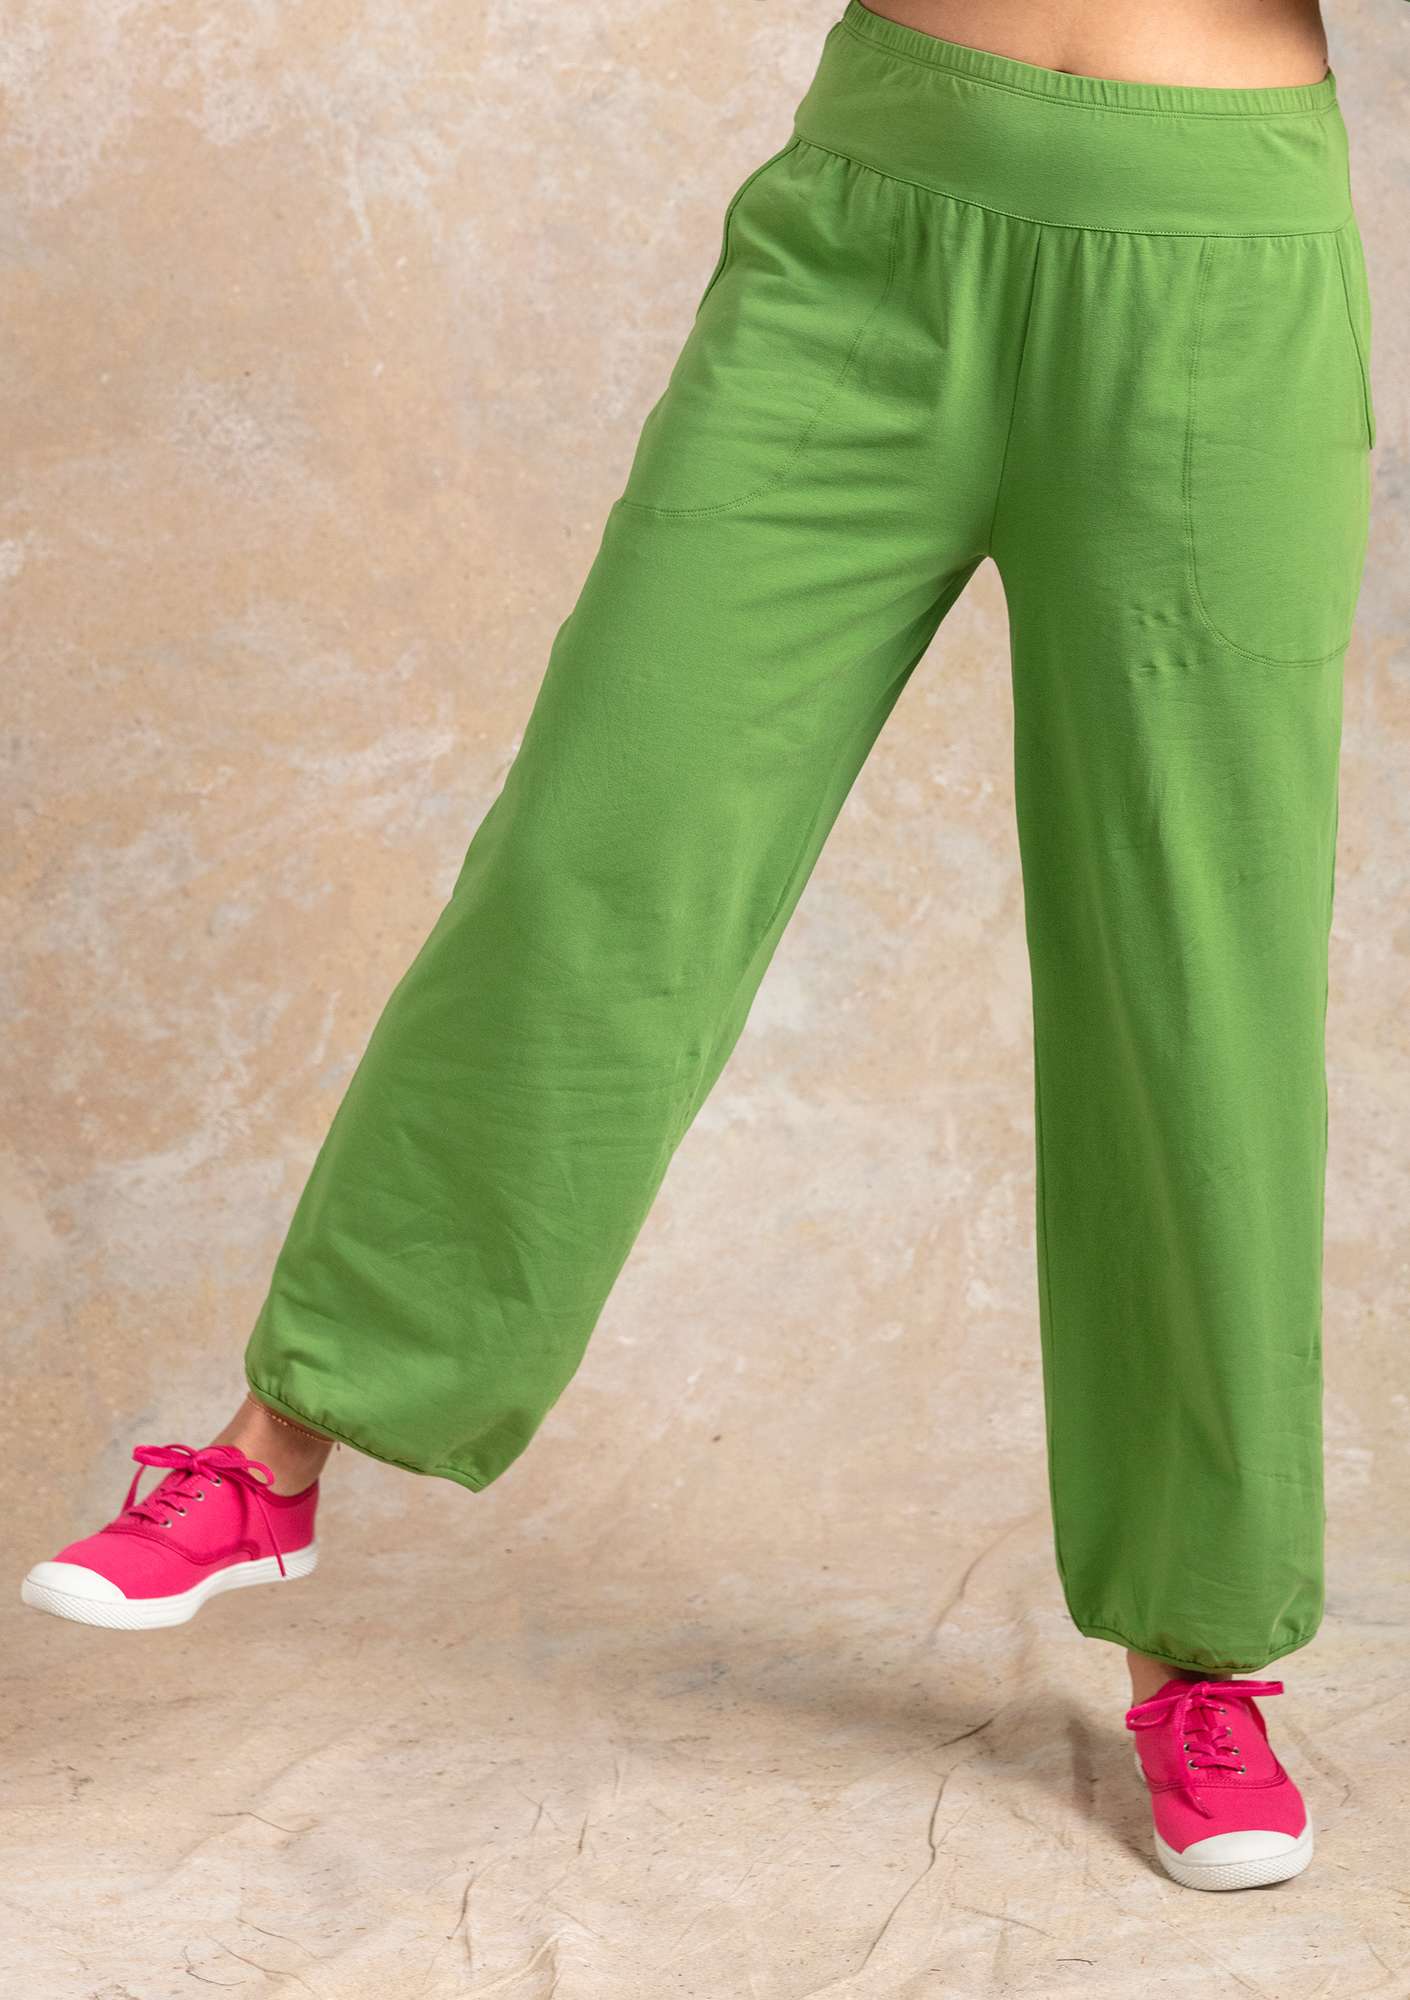 Solid-colored jersey pants cactus